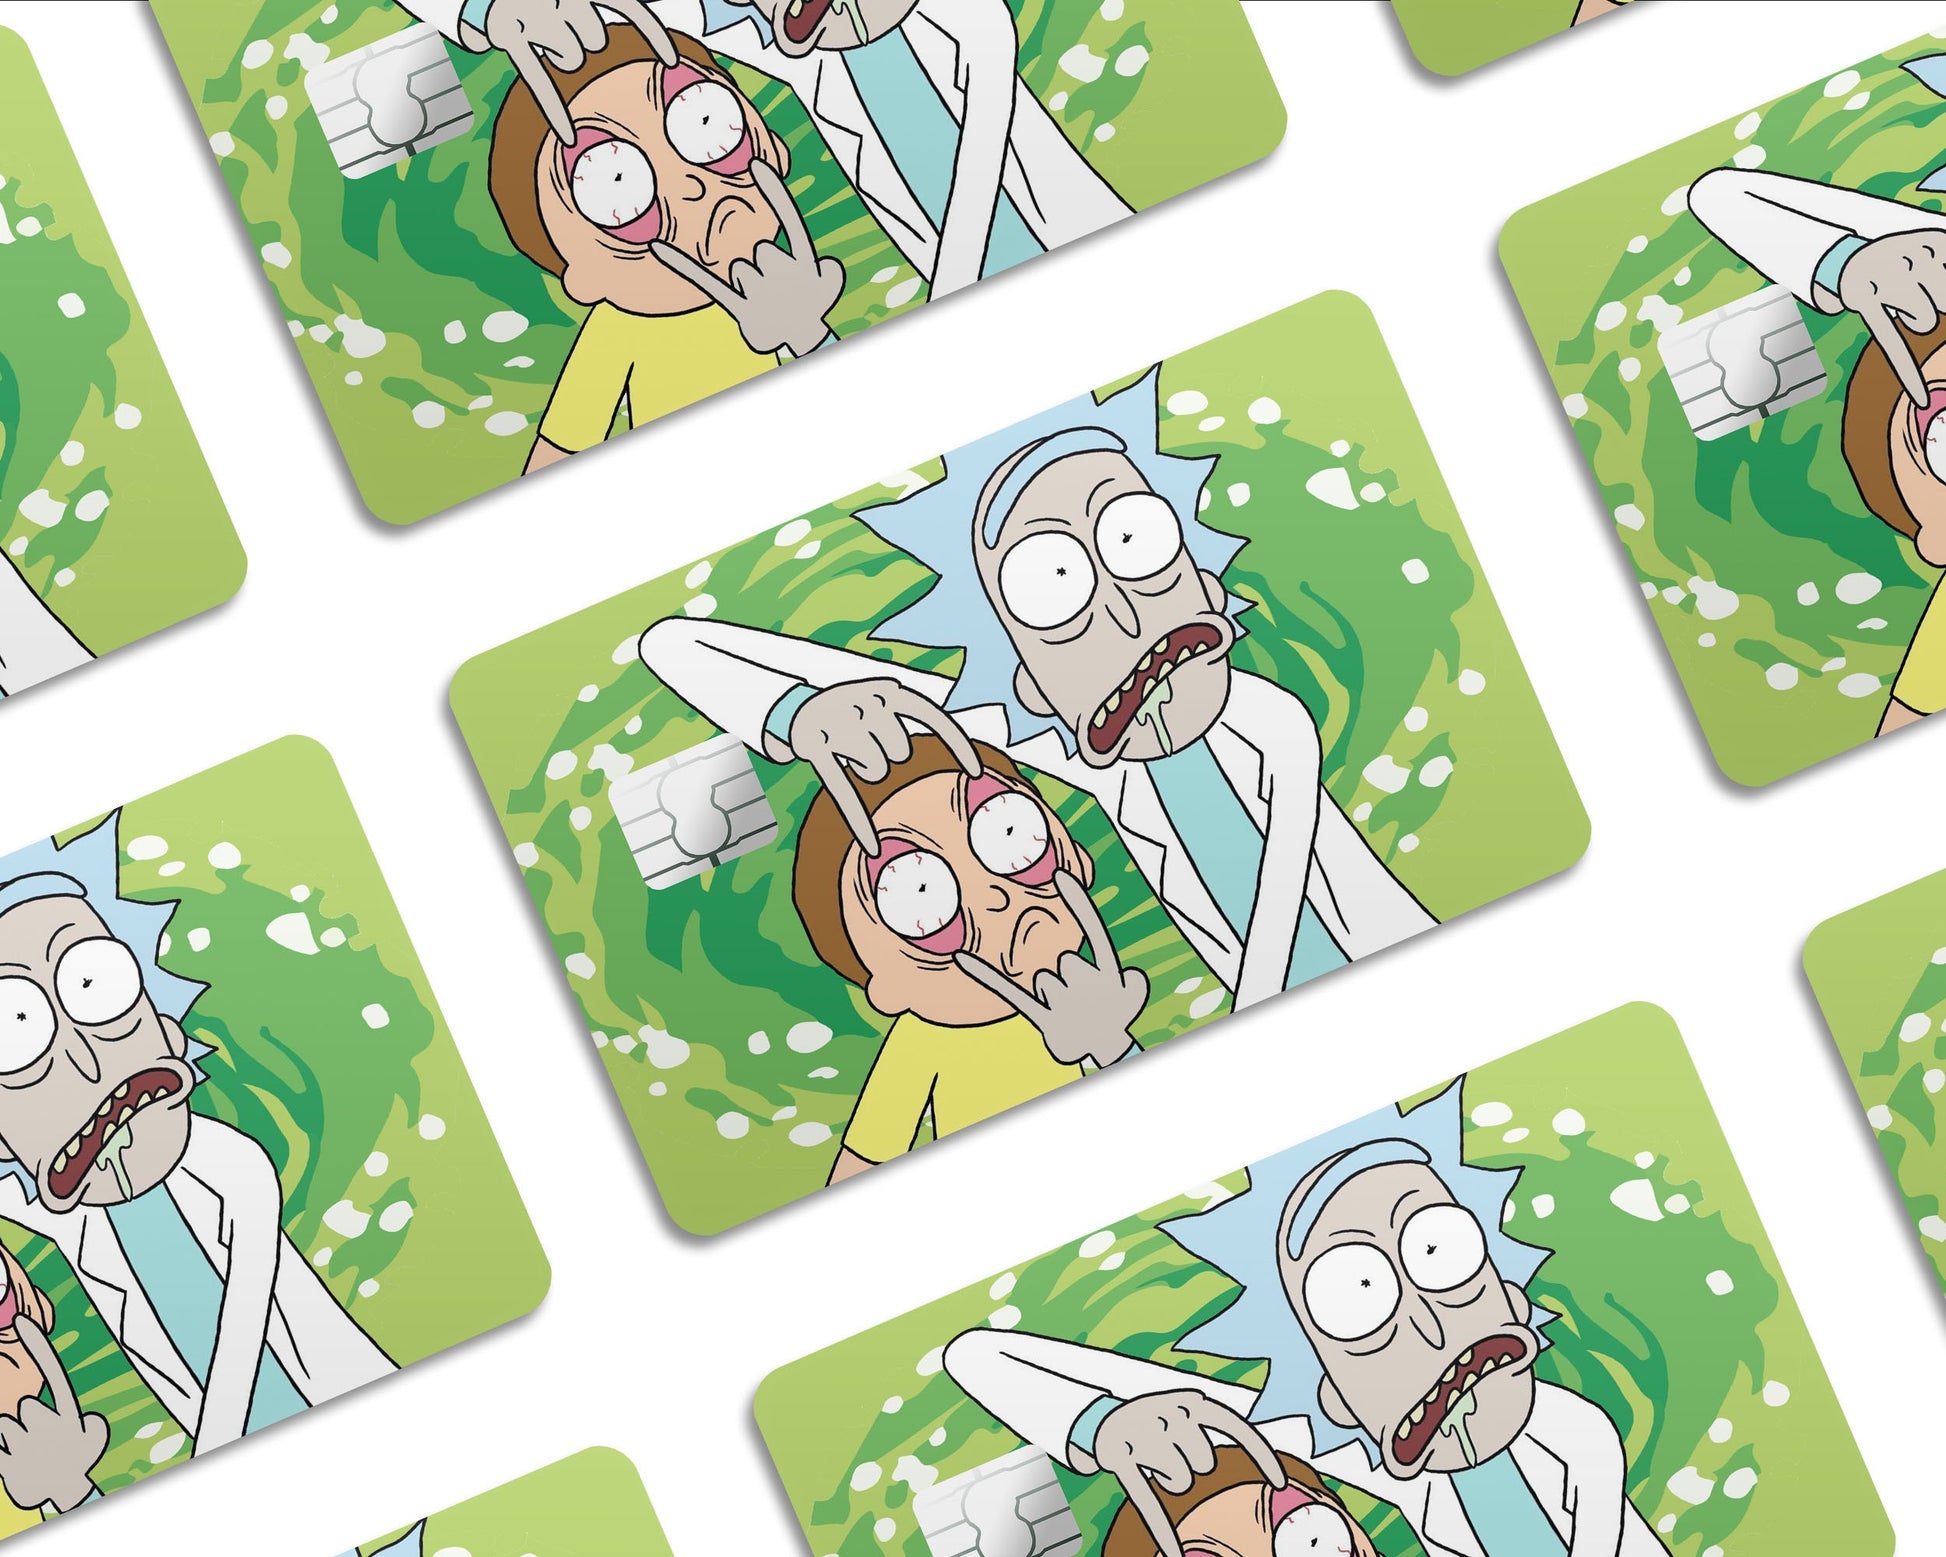 Anime Town Creations Credit Card Rick and Morty Open Your Eyes Morty Half Skins - Pop culture Rick and Morty Skin